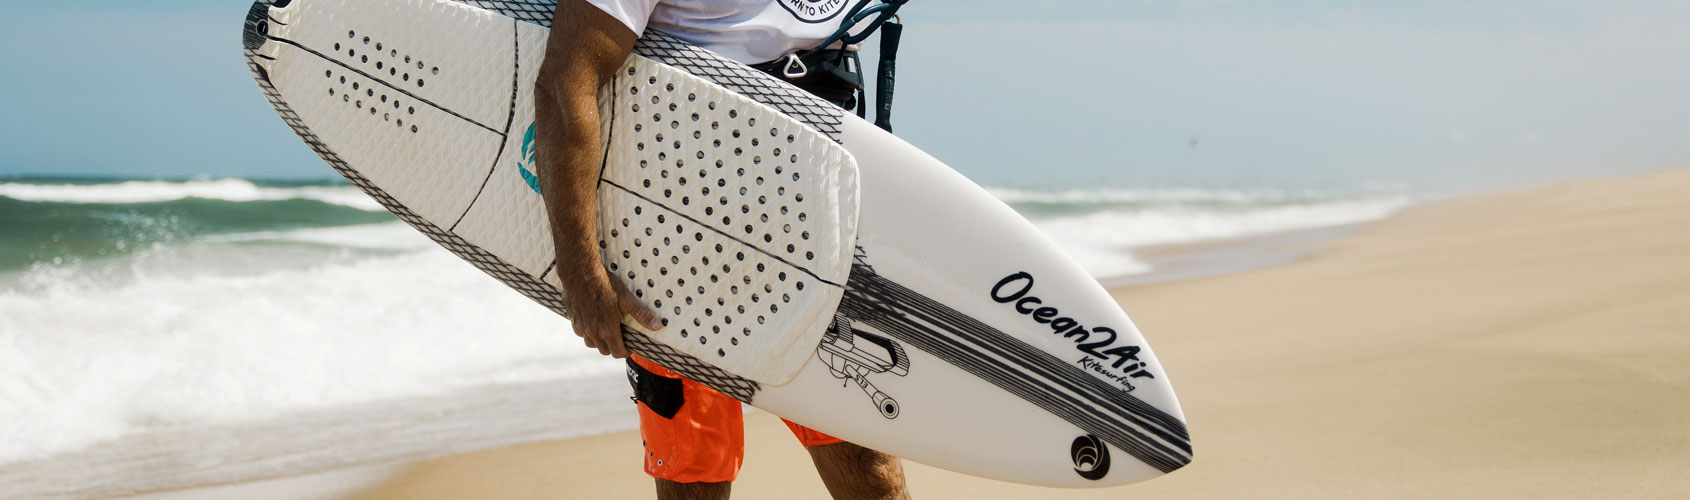 Surfboards for Kitesurfing in South Africa